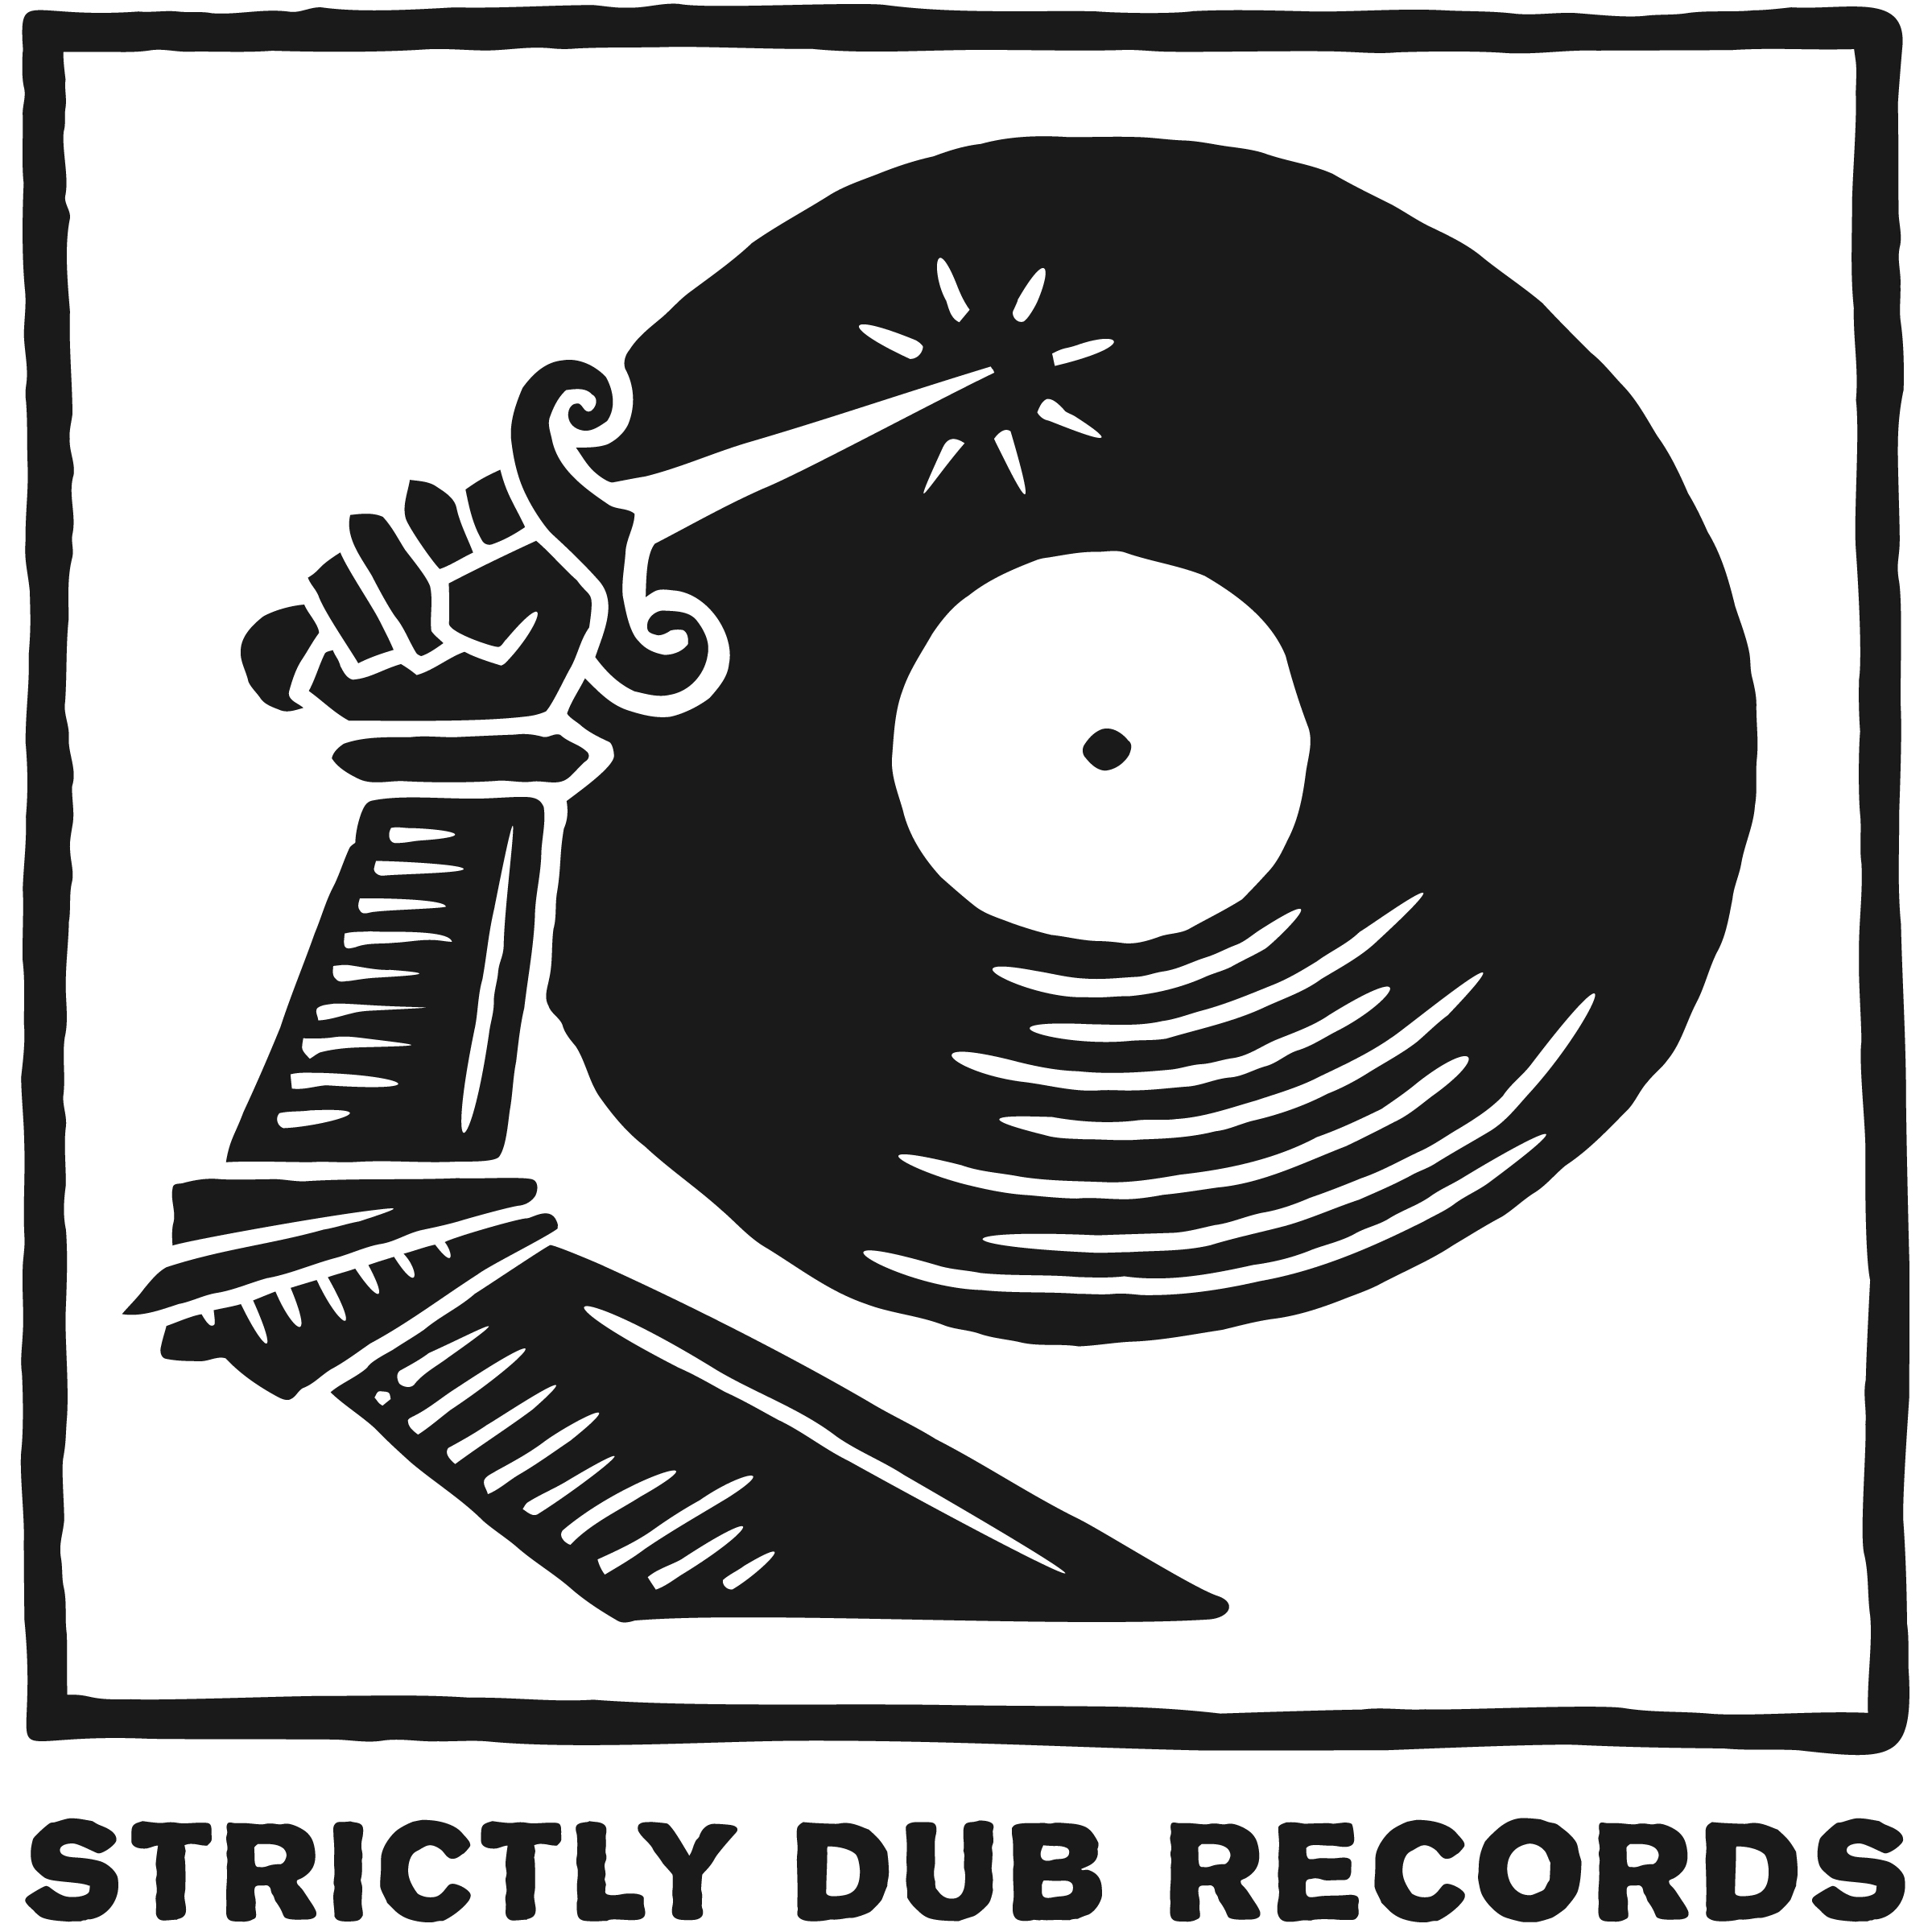 Strictly Dub Records